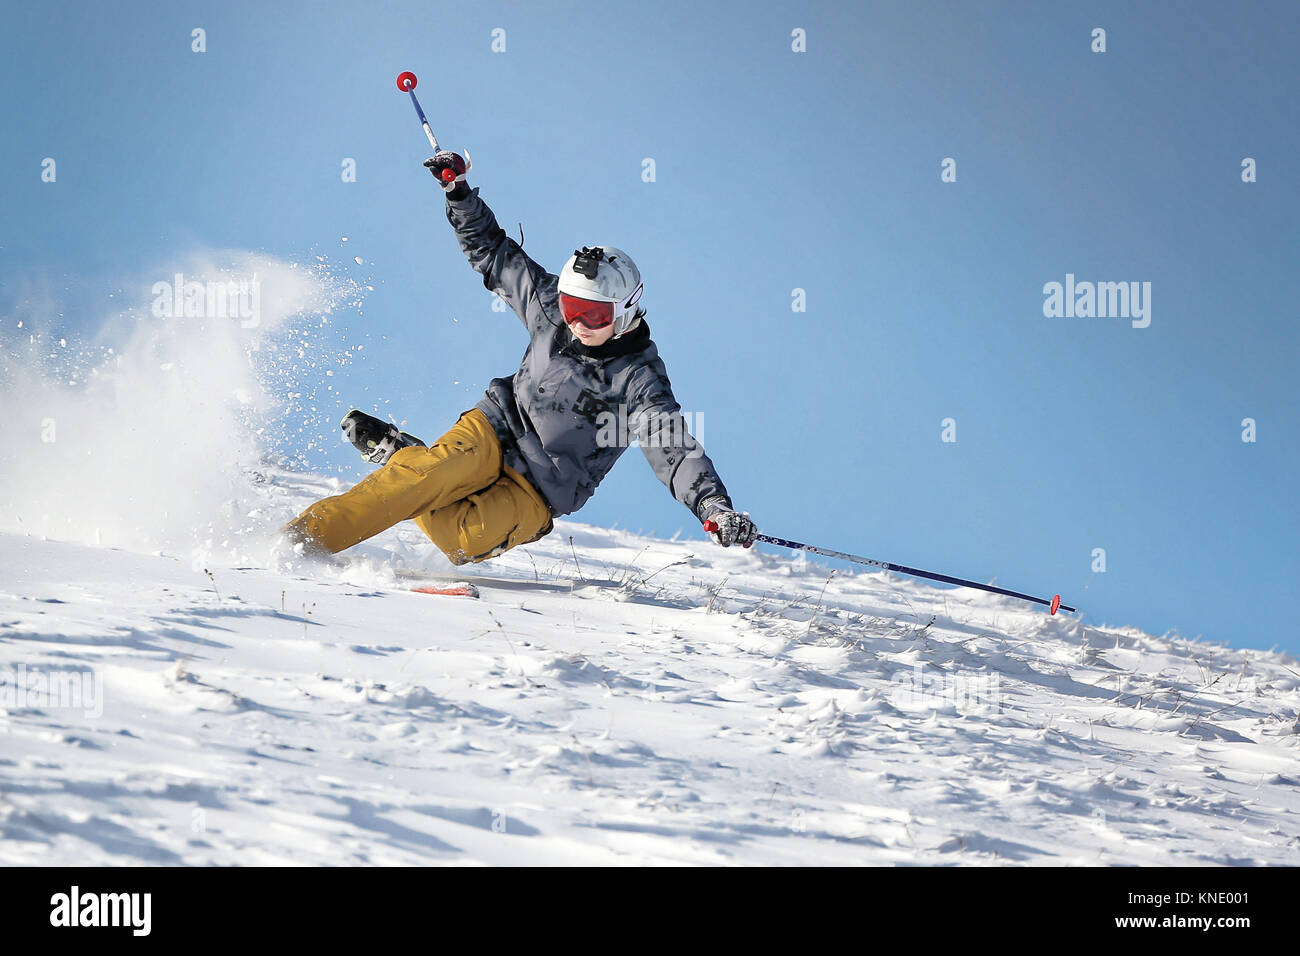 Pictured: A man falls over as he skis in the snow at Storey Arms in the Brecon Beacons, Wales, UK. Monday 11 December 2017 Re: Freezing temperatures,  Stock Photo